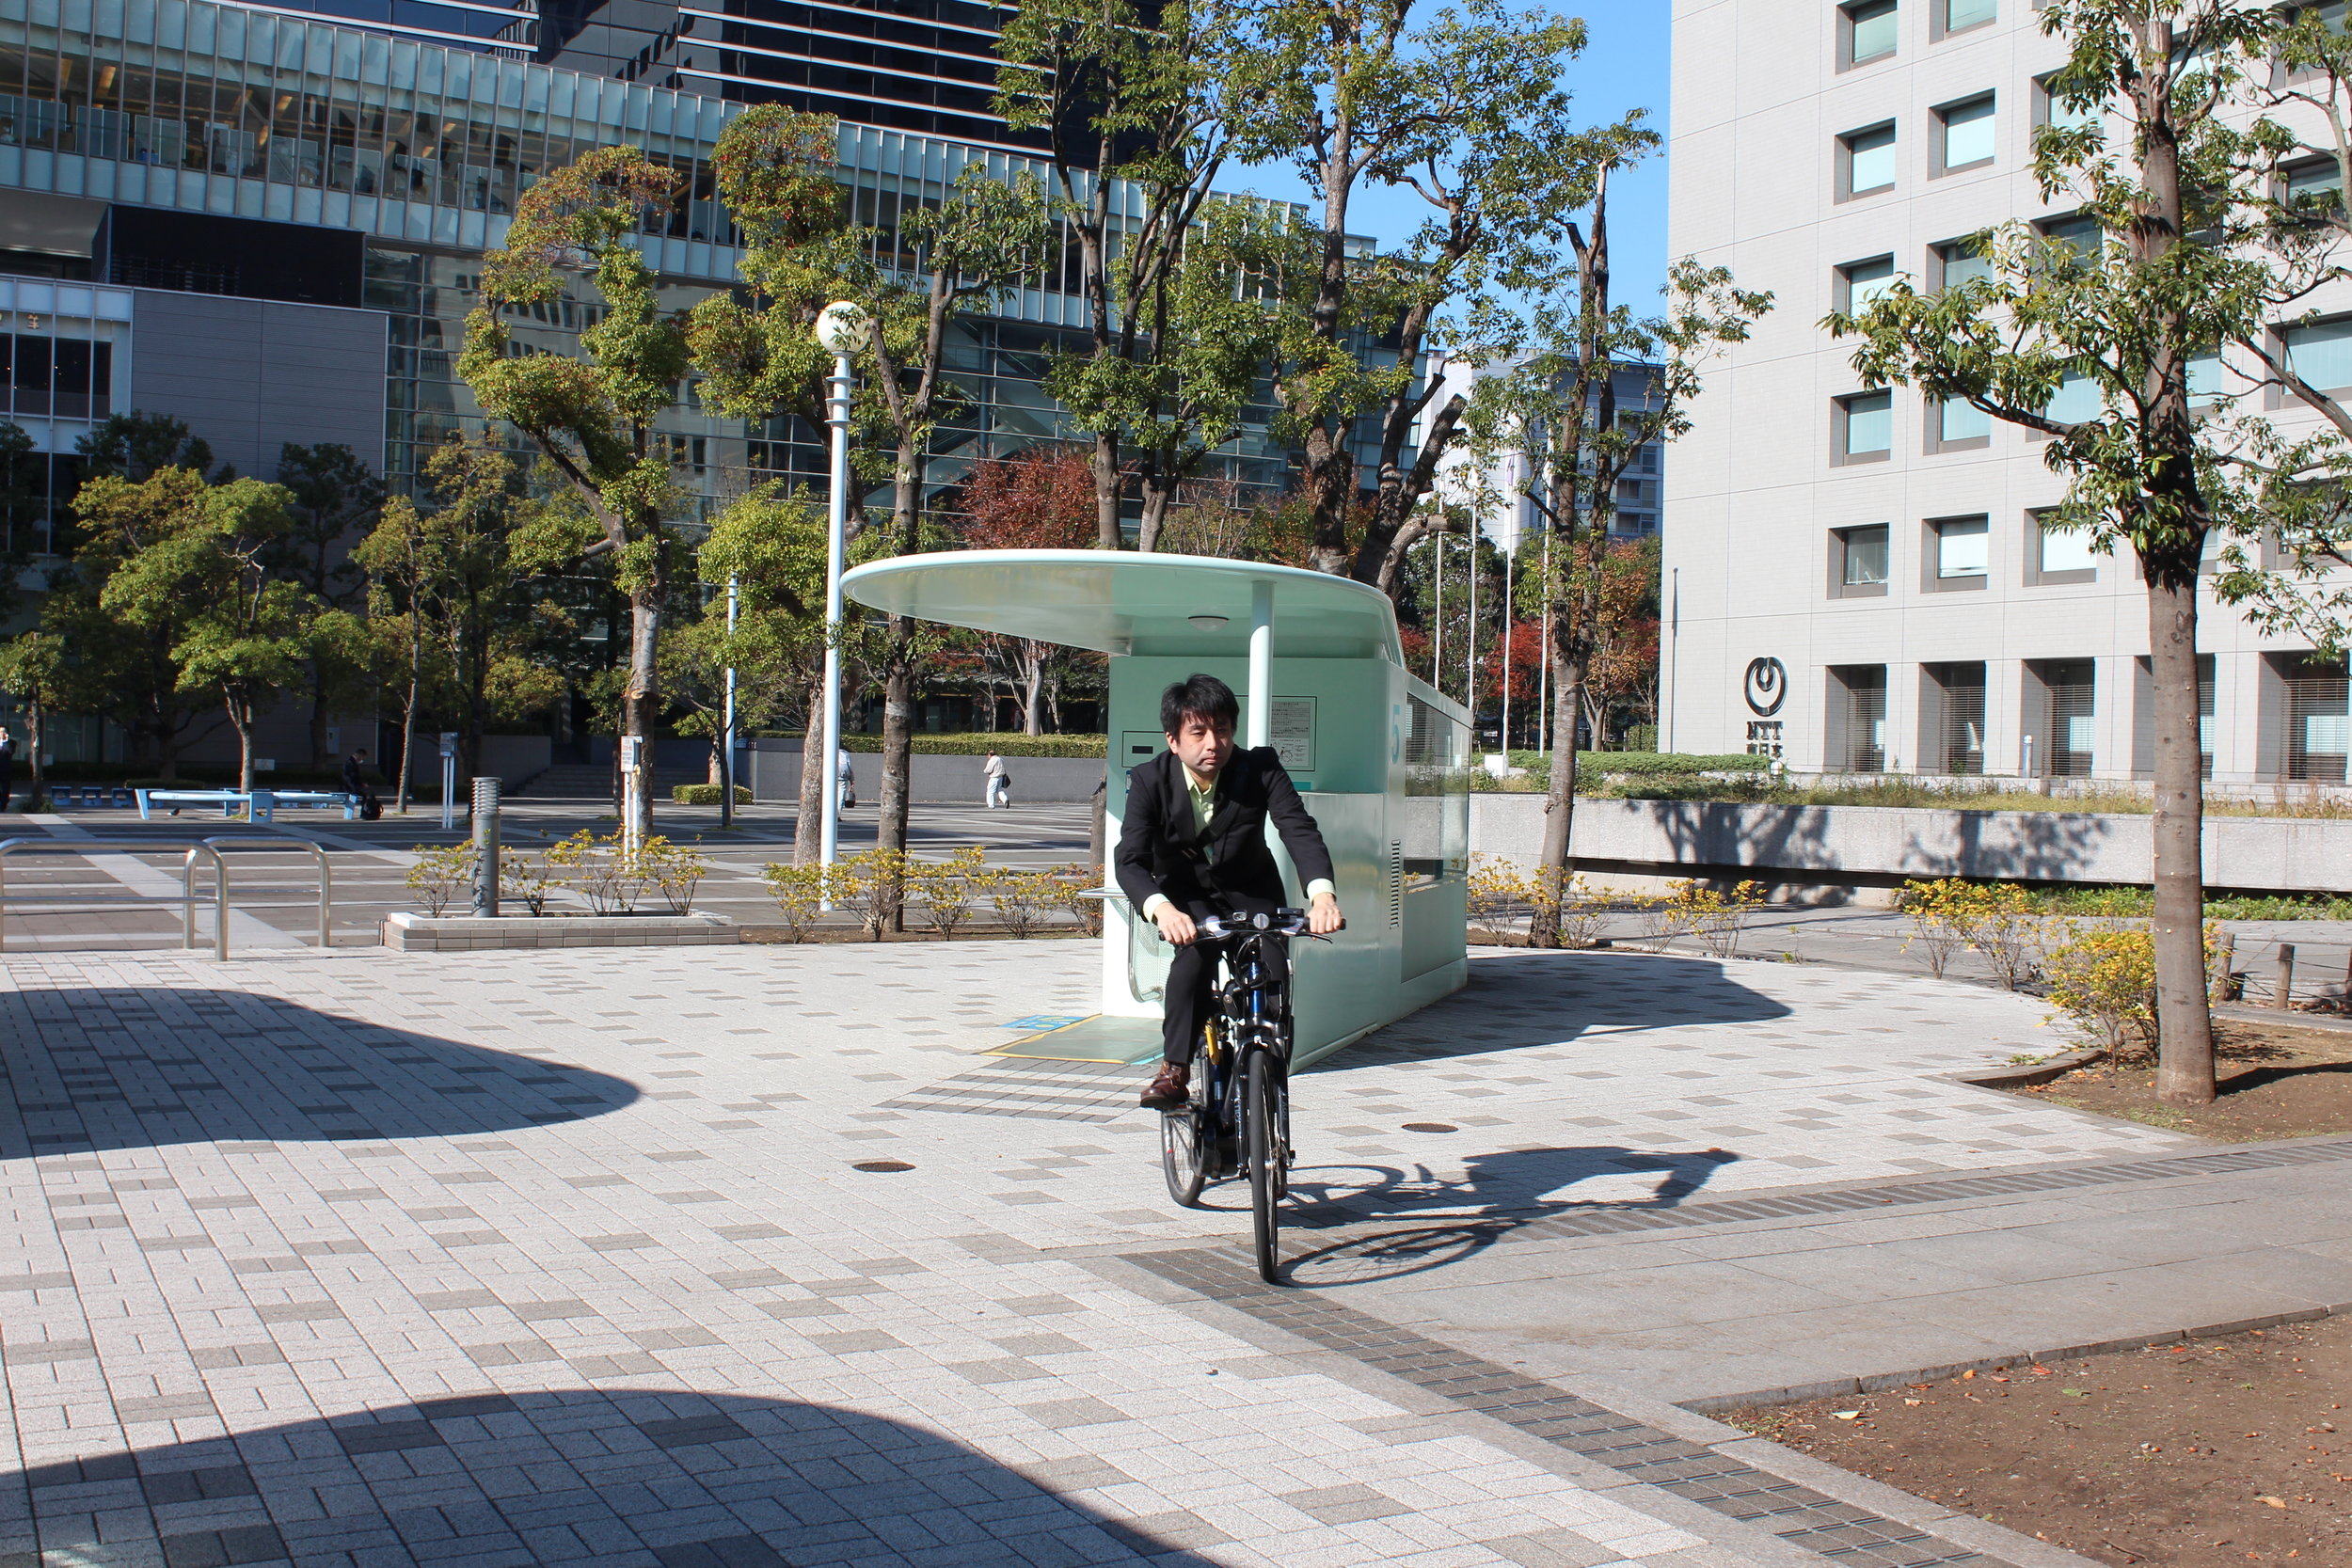 Amazing Tokyo bike parking pulls bike into device and in seconds it's in a secure underground carousel.28.JPG